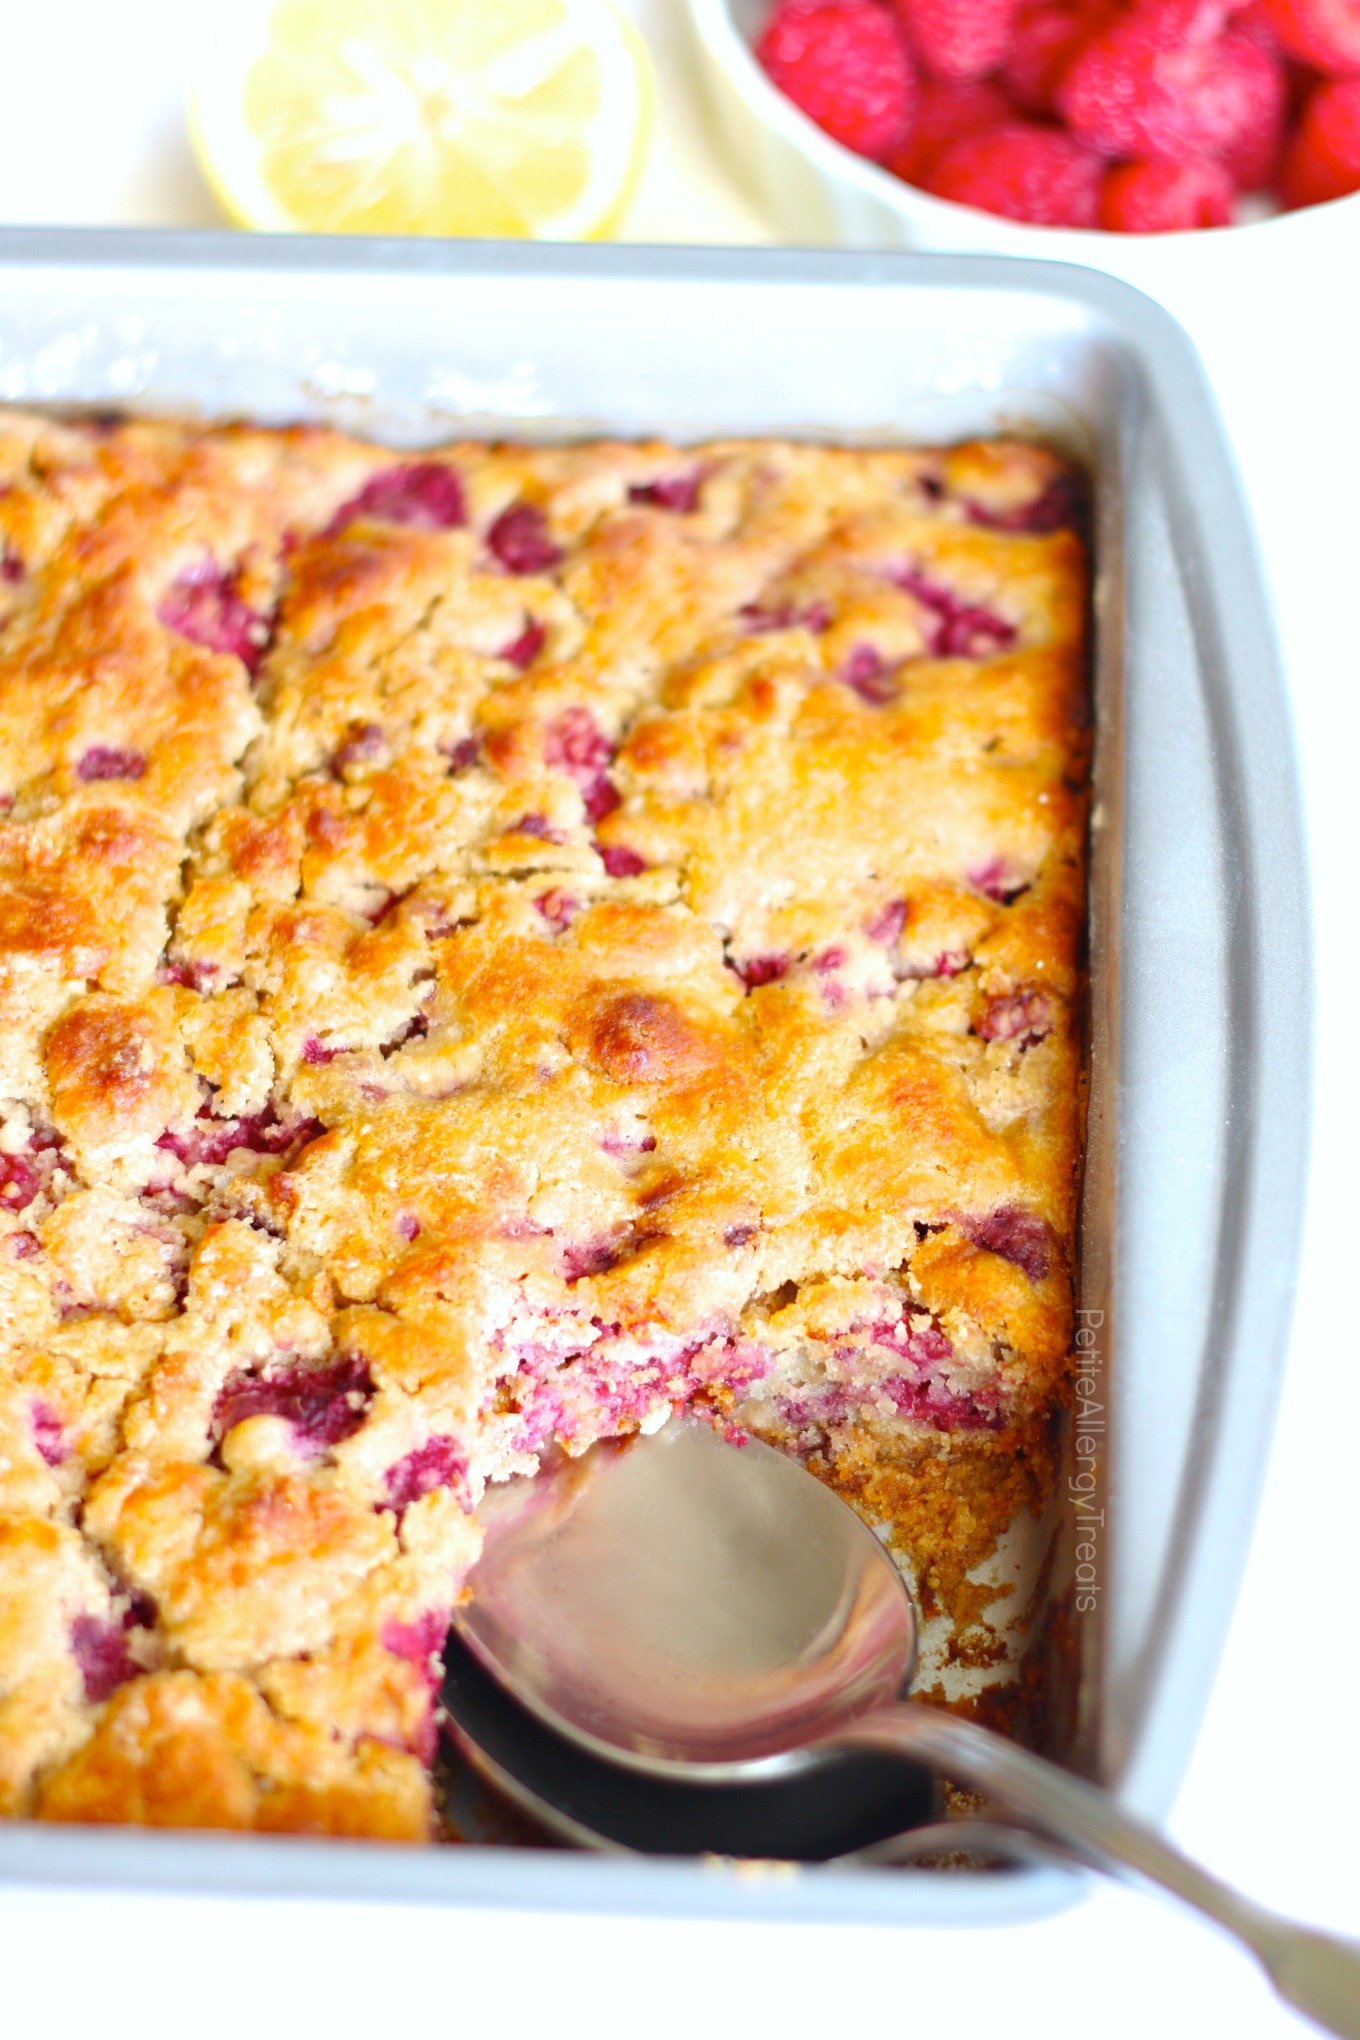 Gluten Free Raspberry Buckle Cake (dairy free vegan) Recipe- Healthier no bowl required breakfast cake containing real fruit, protein and food allergy friendly.